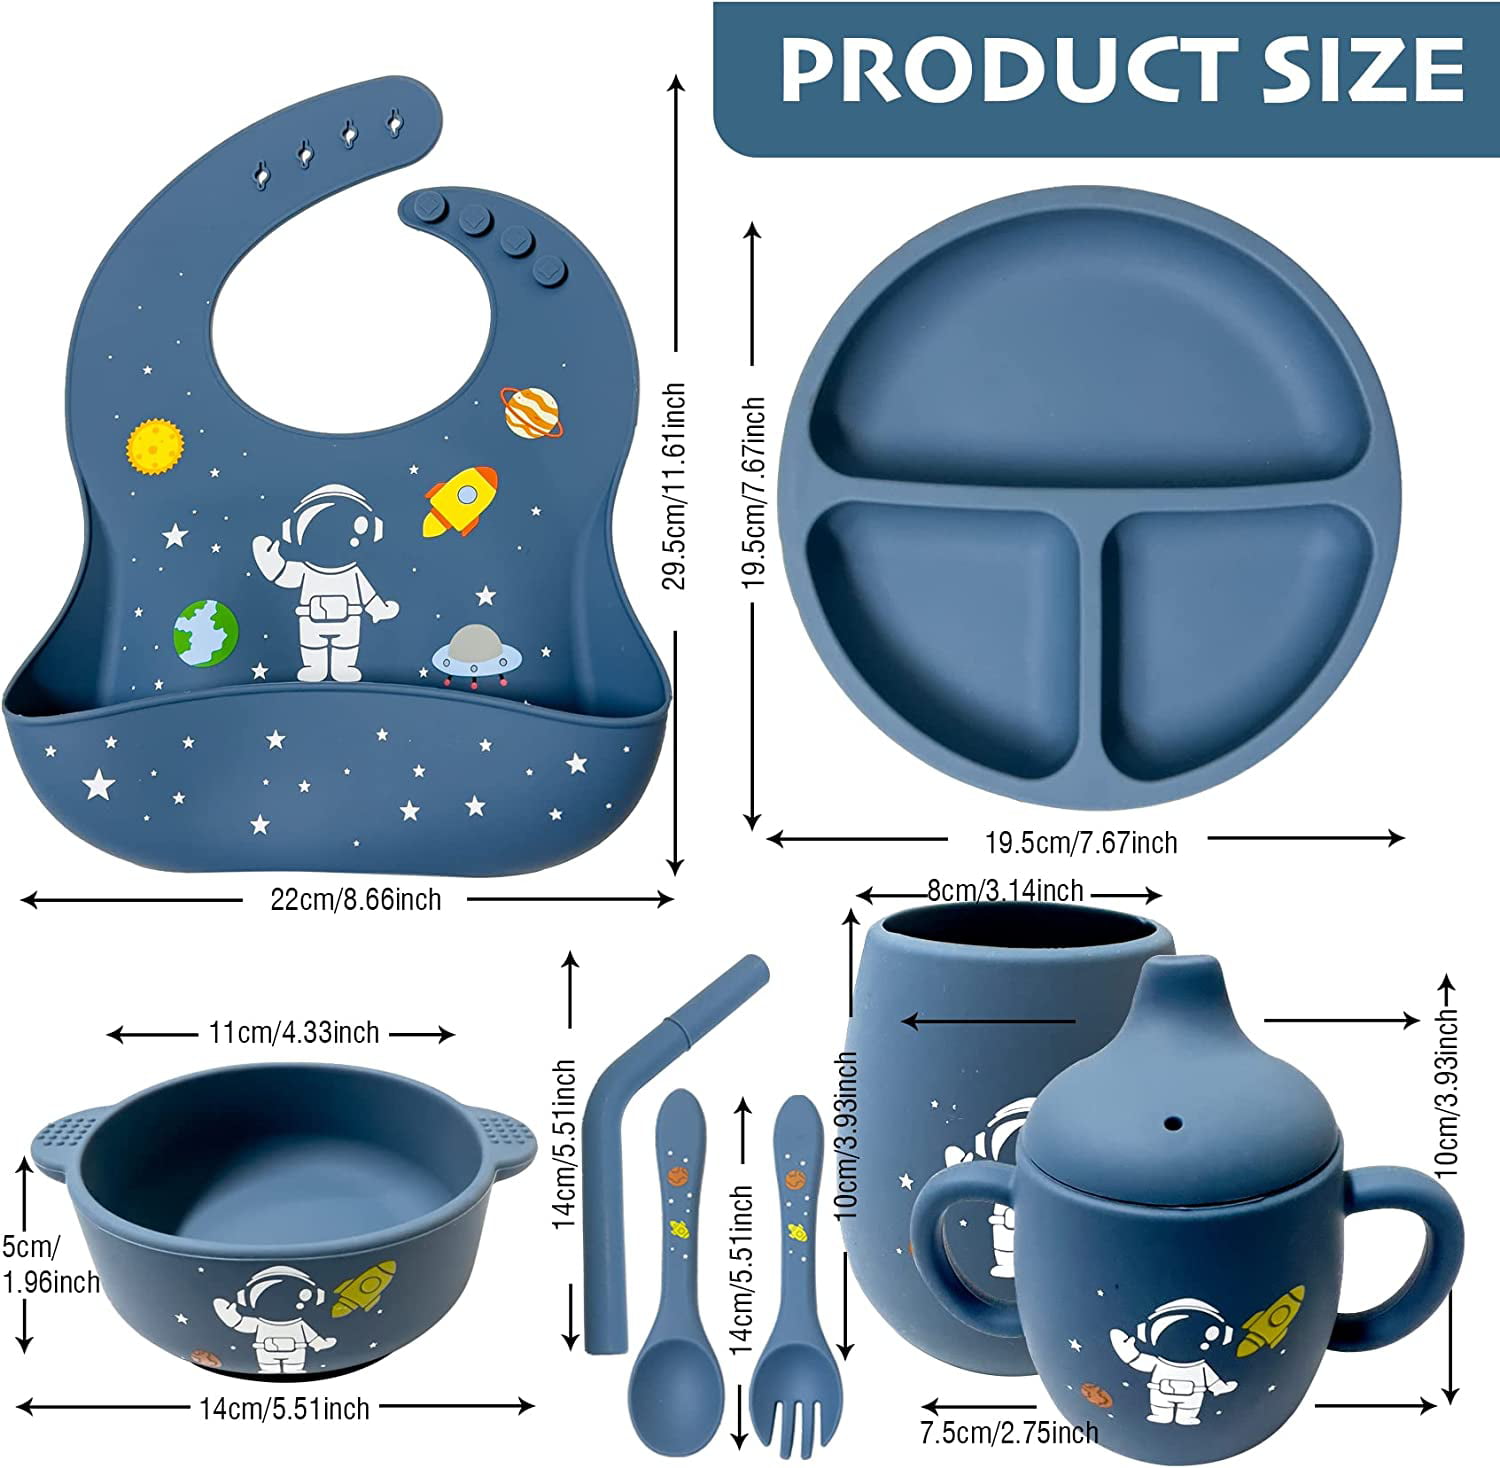 Lalo First Bites Silicone Baby Feeding Set - Baby Led Weaning Supplies -  Non-Toxic Silicone - Includes 2 Bibs, 2 Spoons, Training Cup, Suction Plate